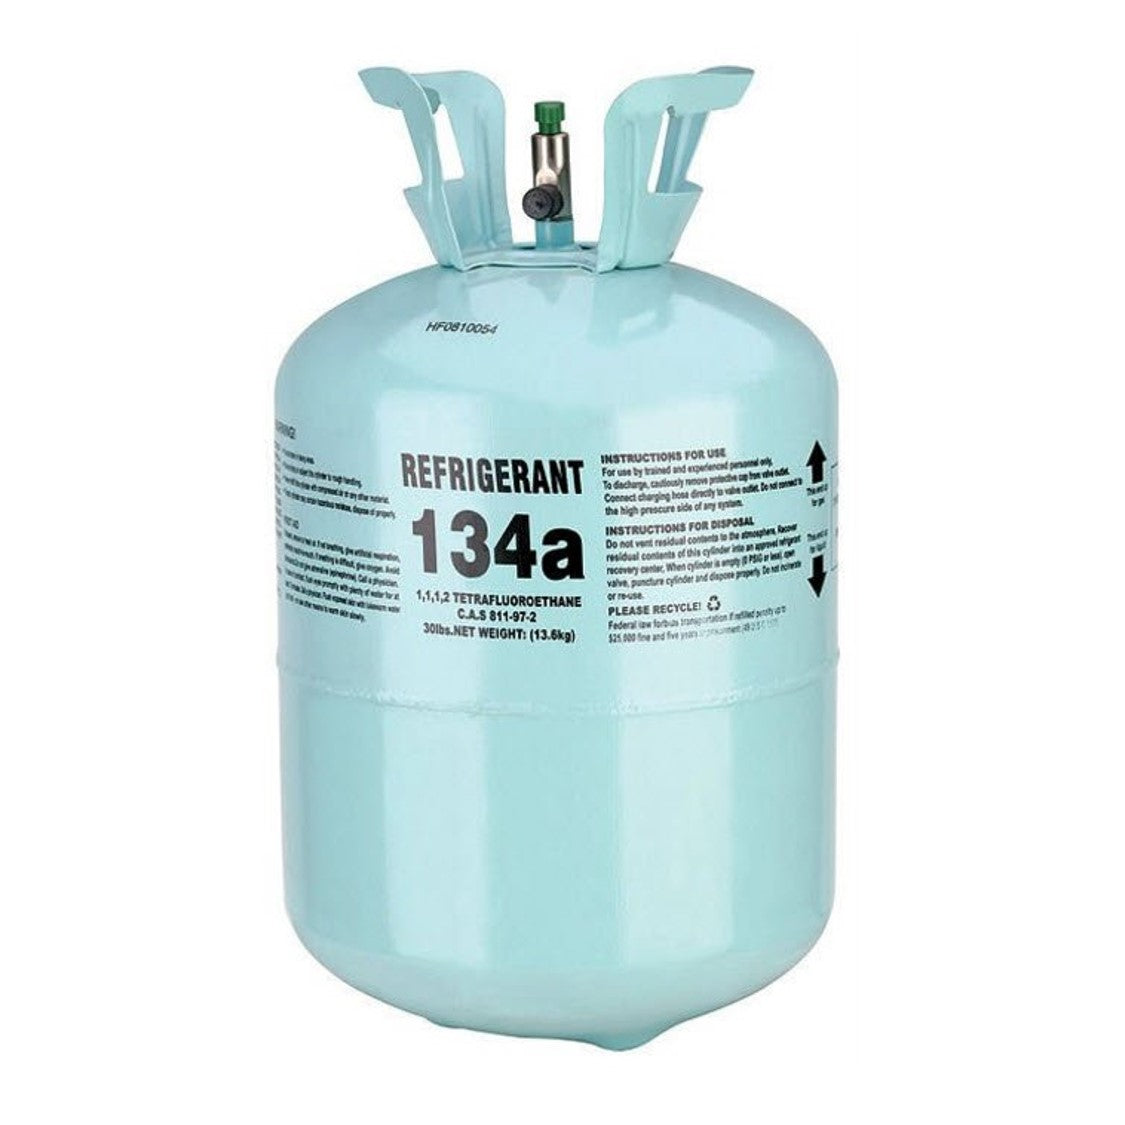 National R134a Refrigerant A/C Cooling Solution 30Lb Cylinder - Efficient & Reliable